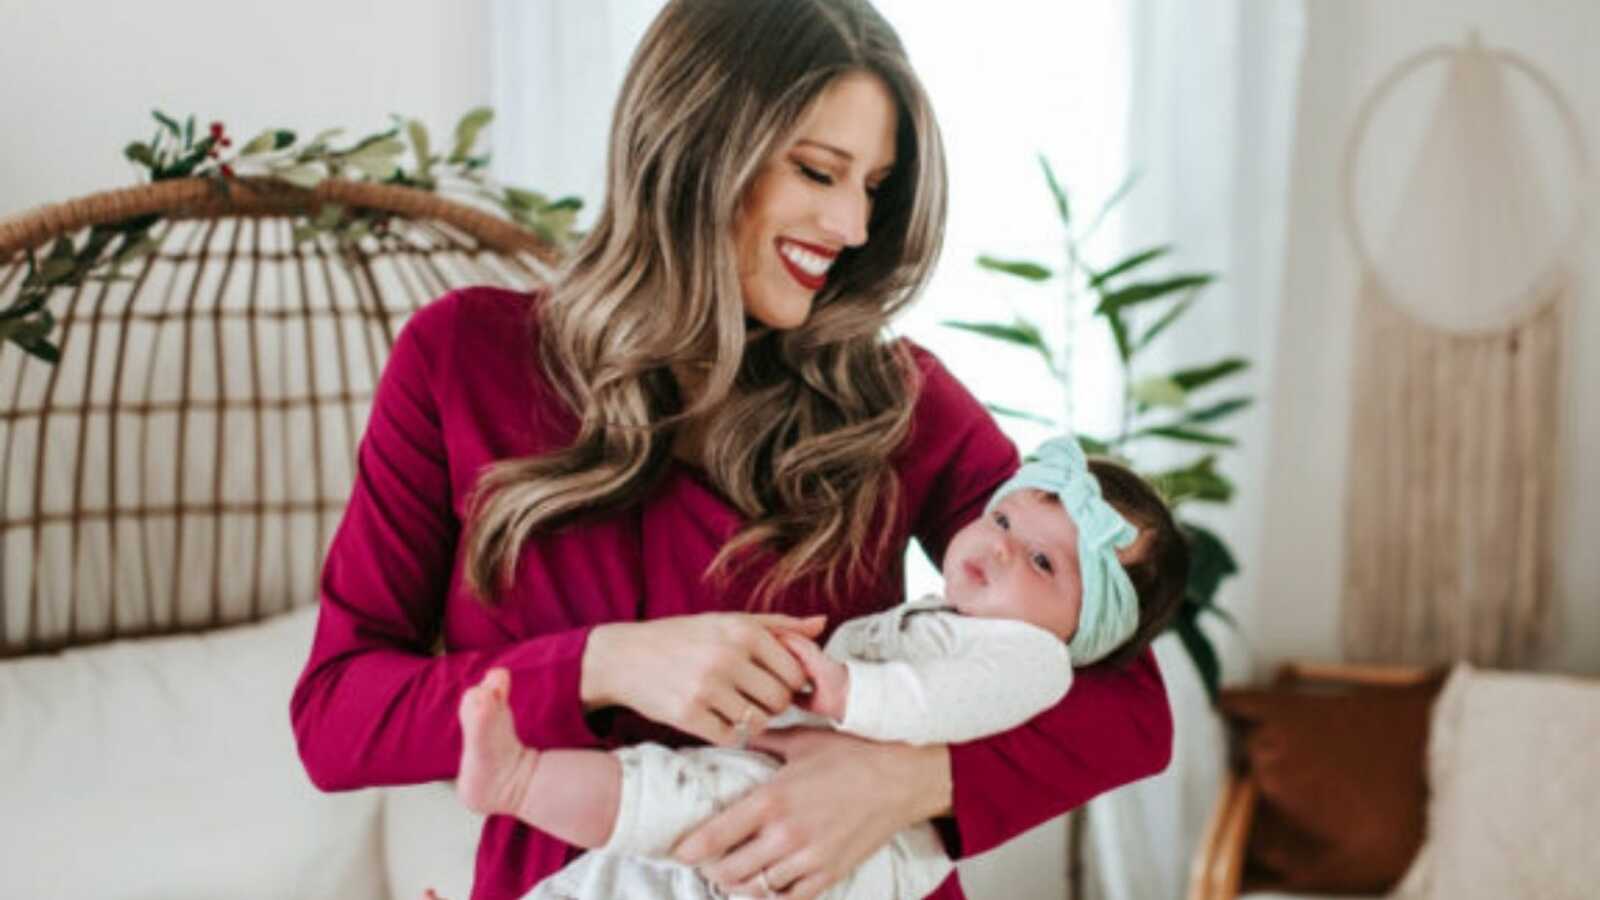 woman holding her child and smiling down at them